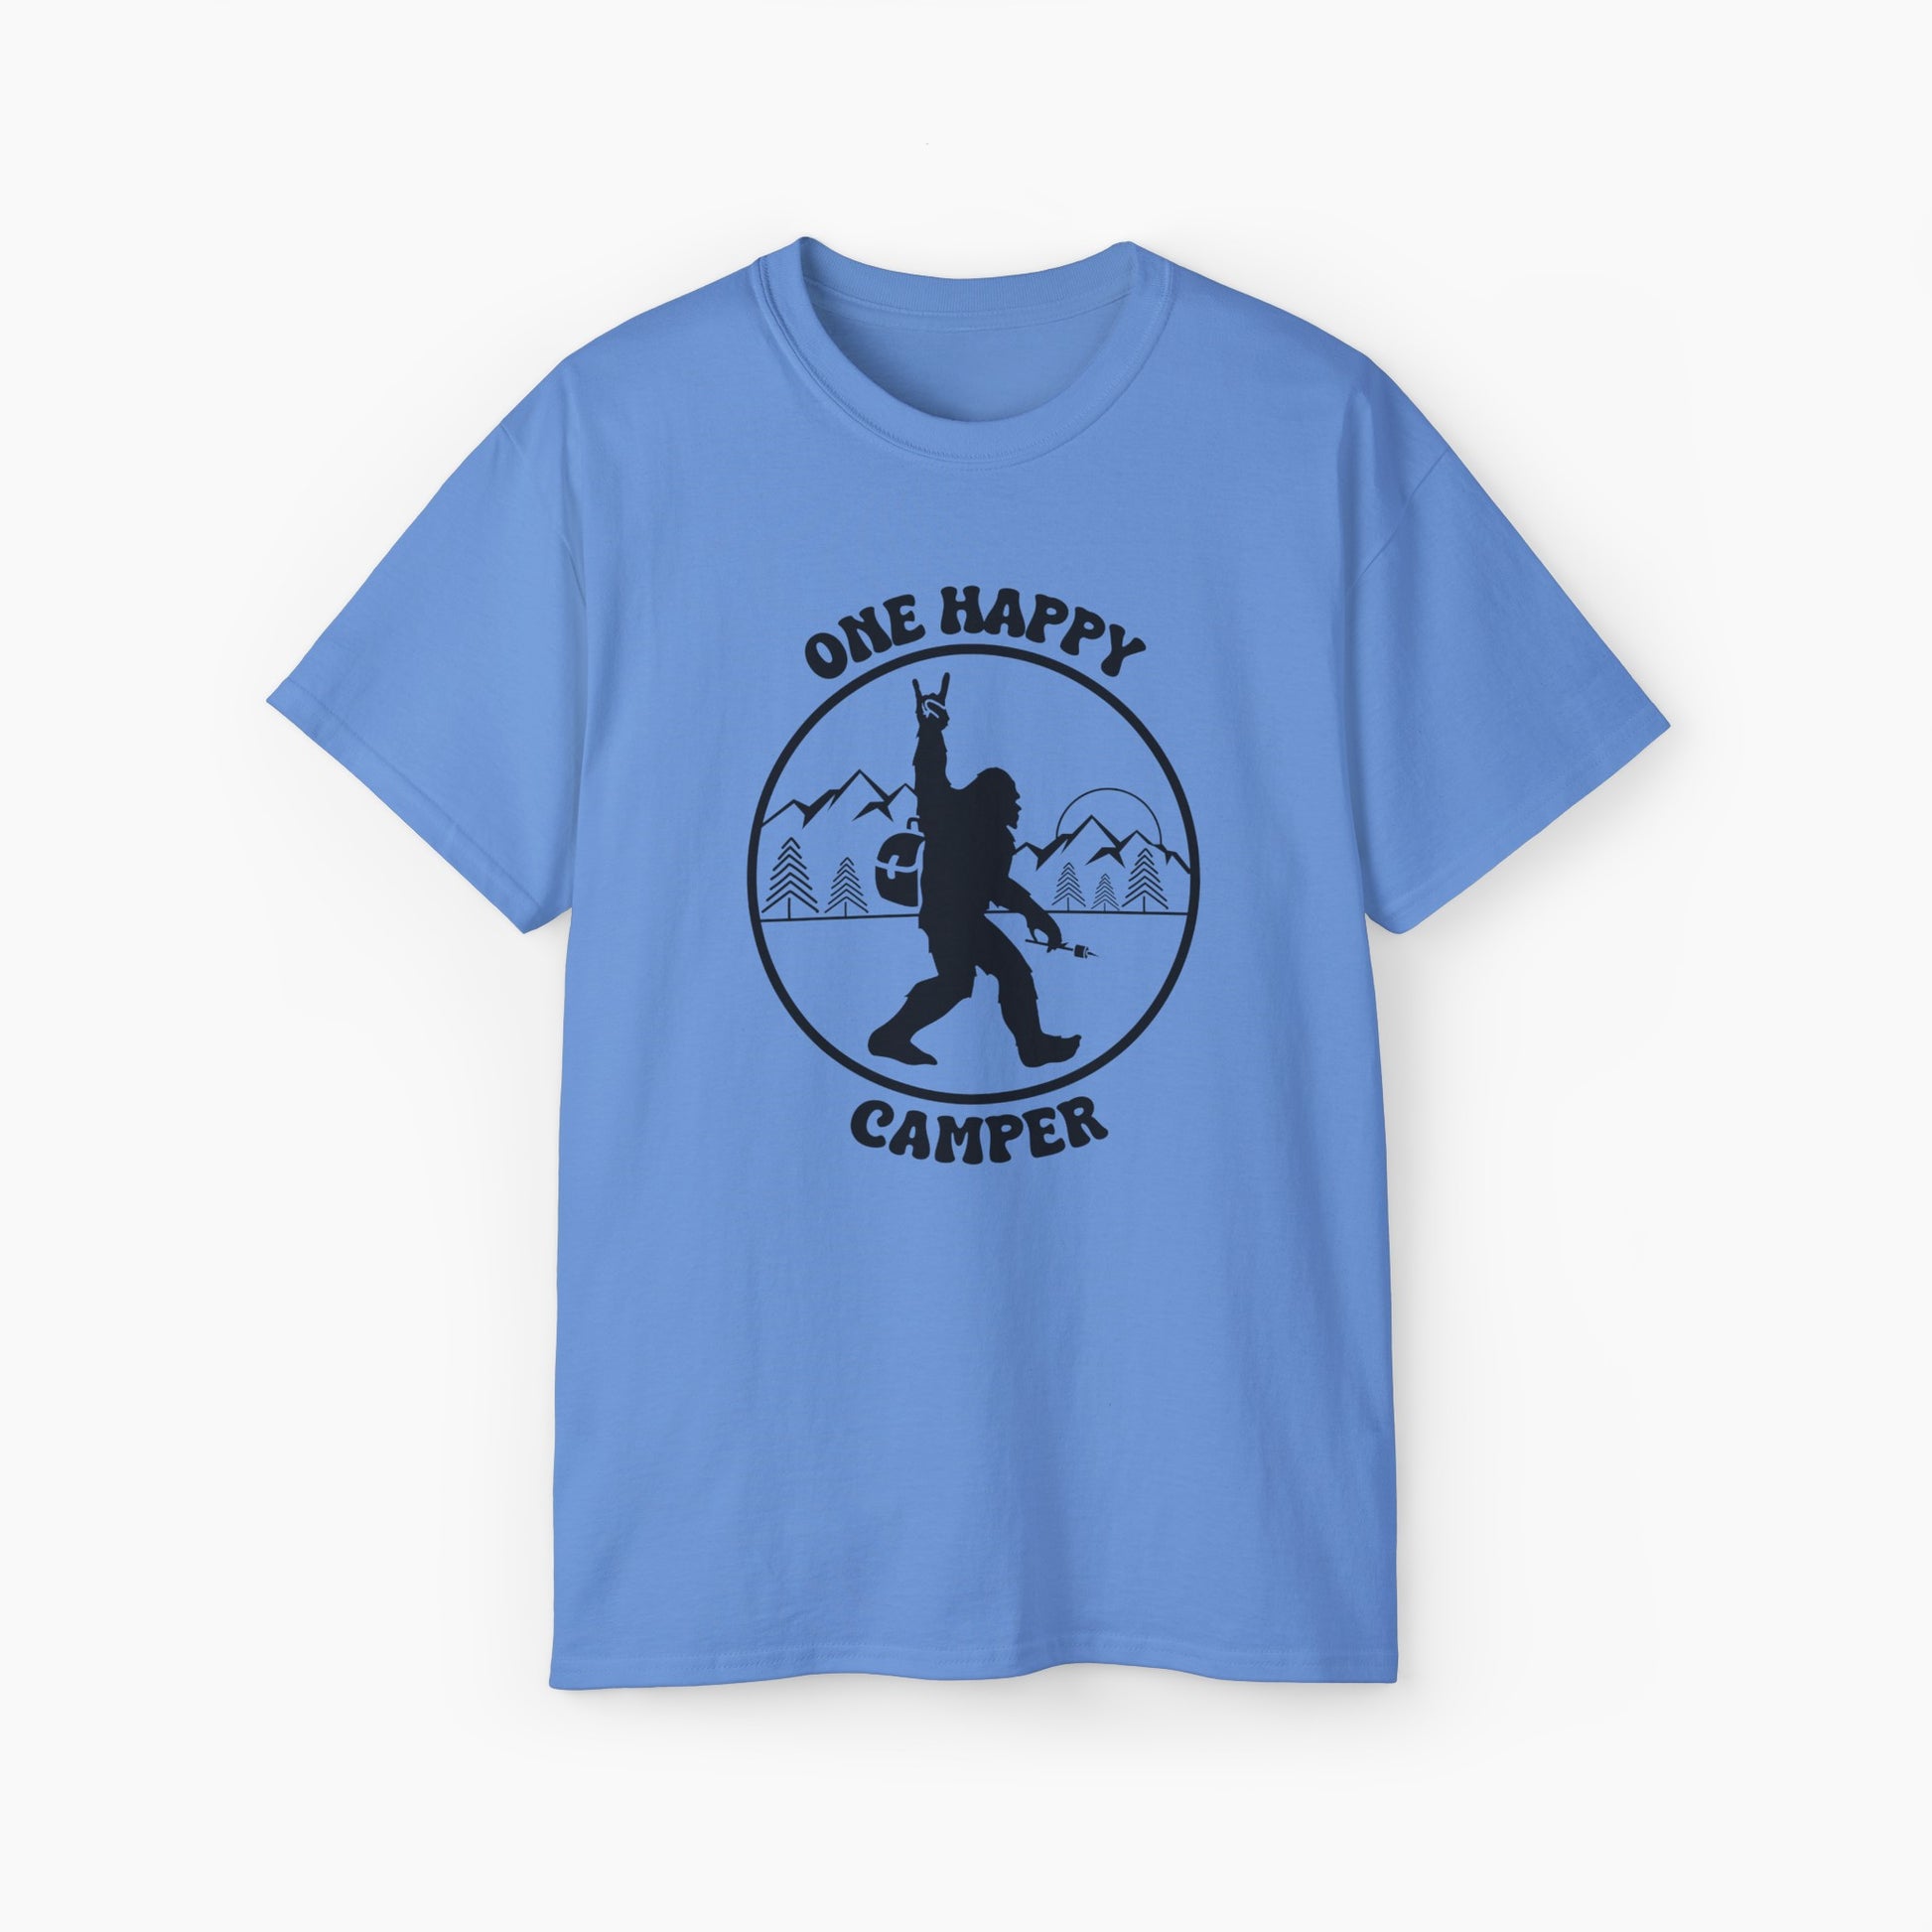 Light blue color t-shirt with 'One Happy Camper' text, featuring Bigfoot making a peace sign, set against a subtle background of trees and mountains.